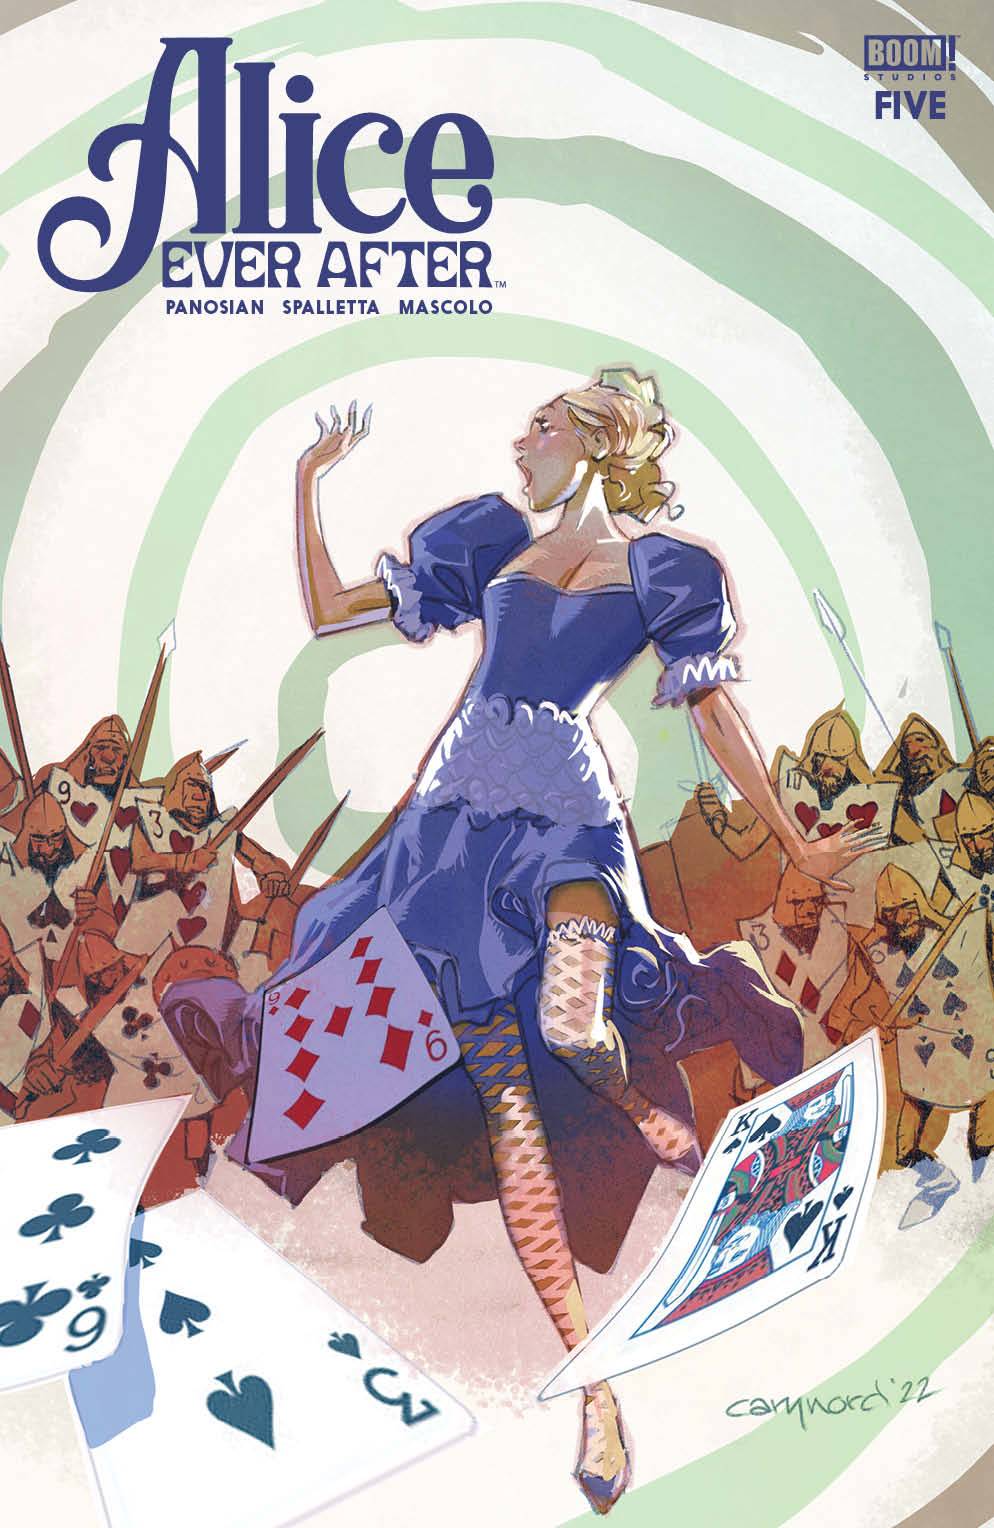 ALICE EVER AFTER #5 (OF 5)